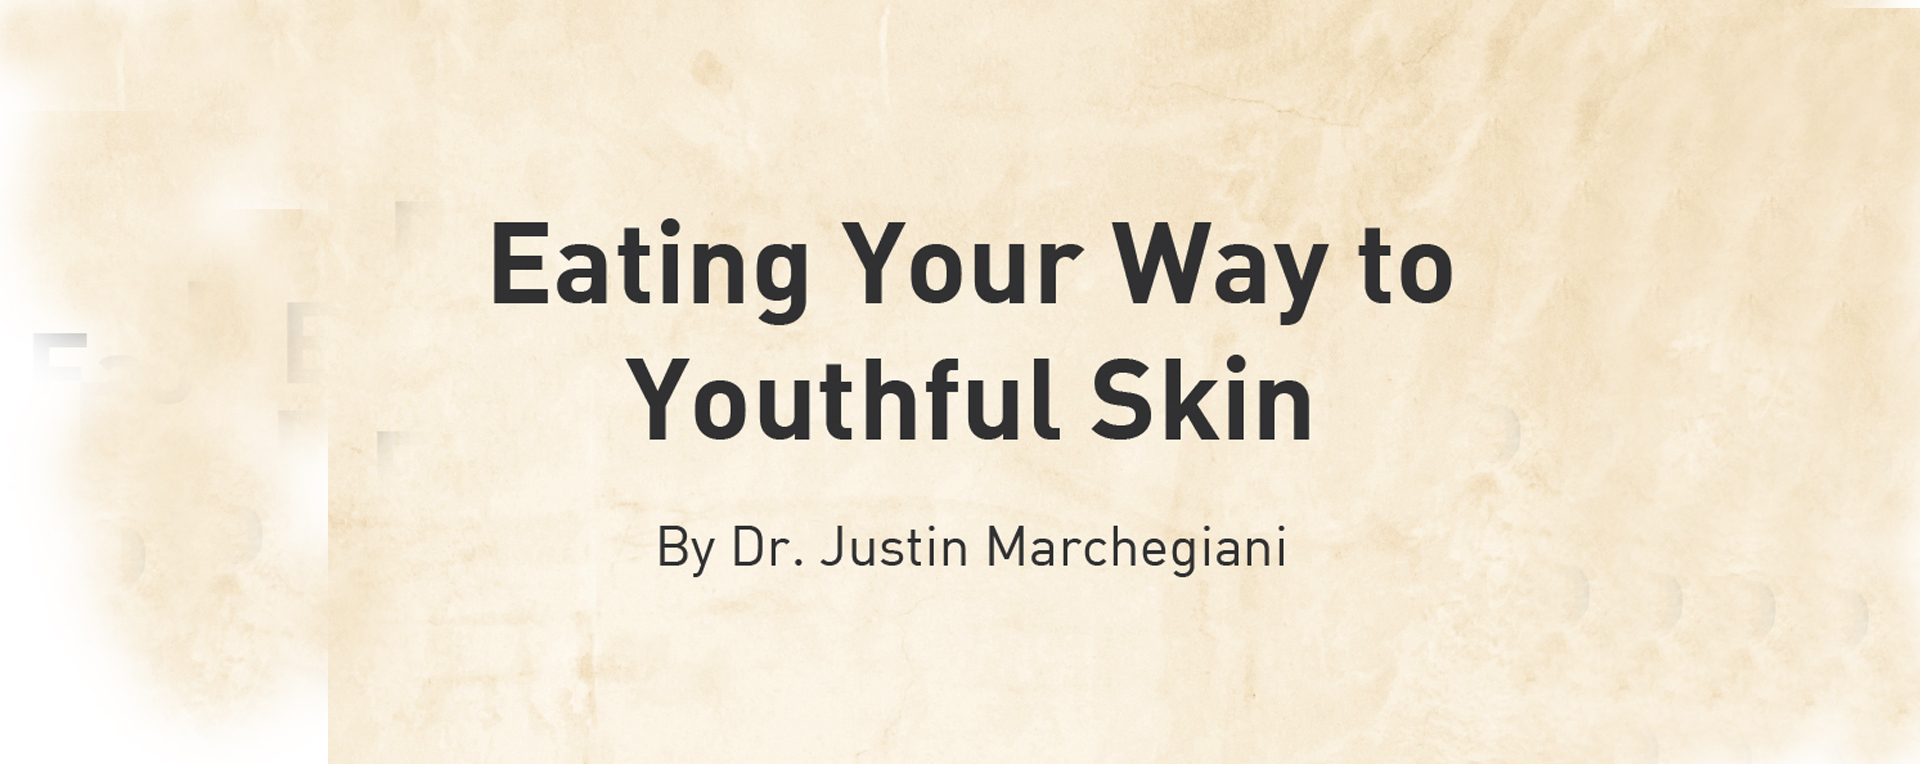 Eating Your Way to Youthful Skin